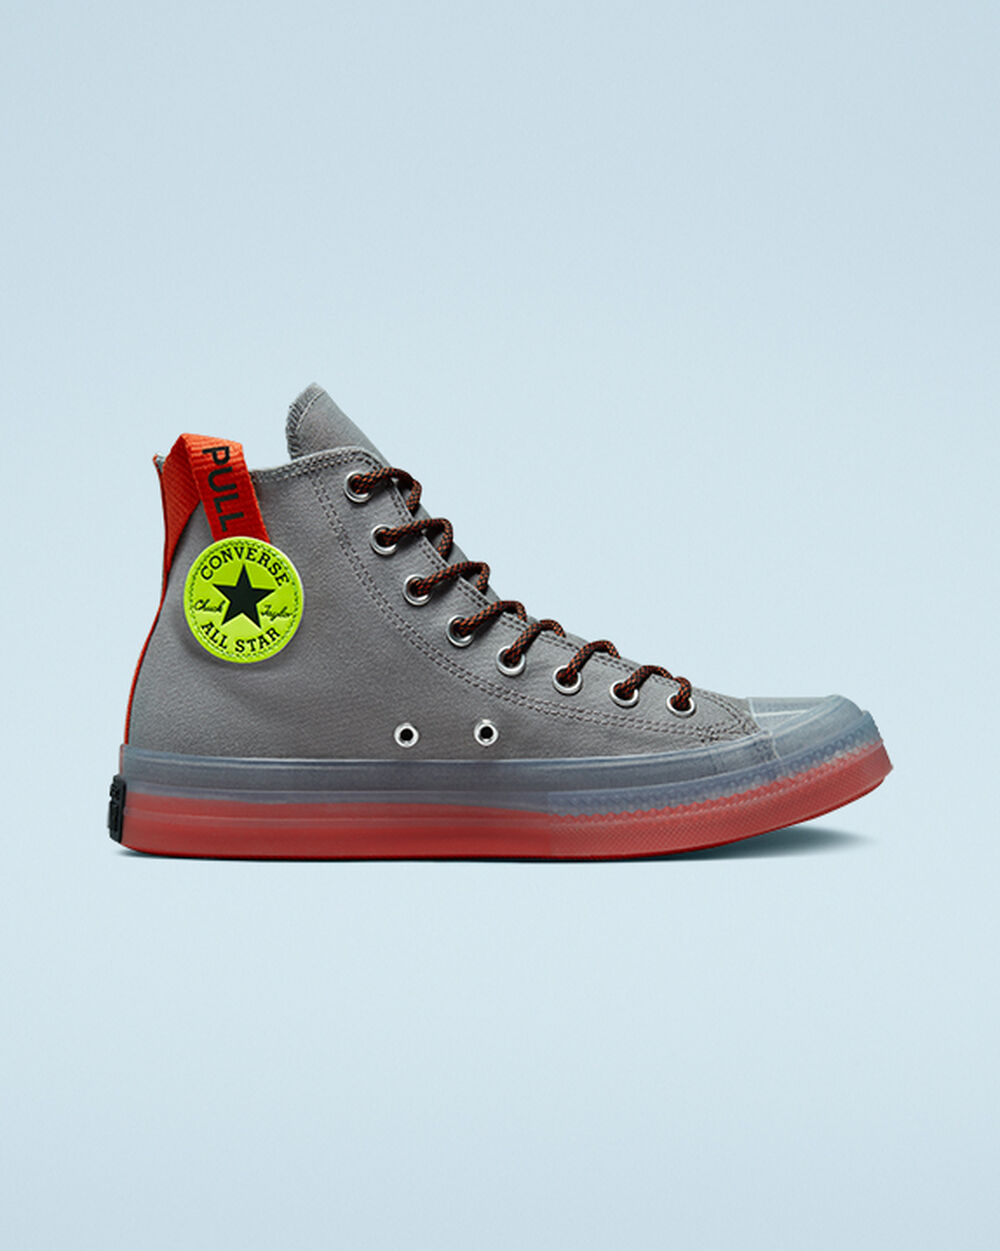 Tenis Converse Chuck Taylor All Star CX Mujer Grises Oscuro Naranjas | Mexico-481206